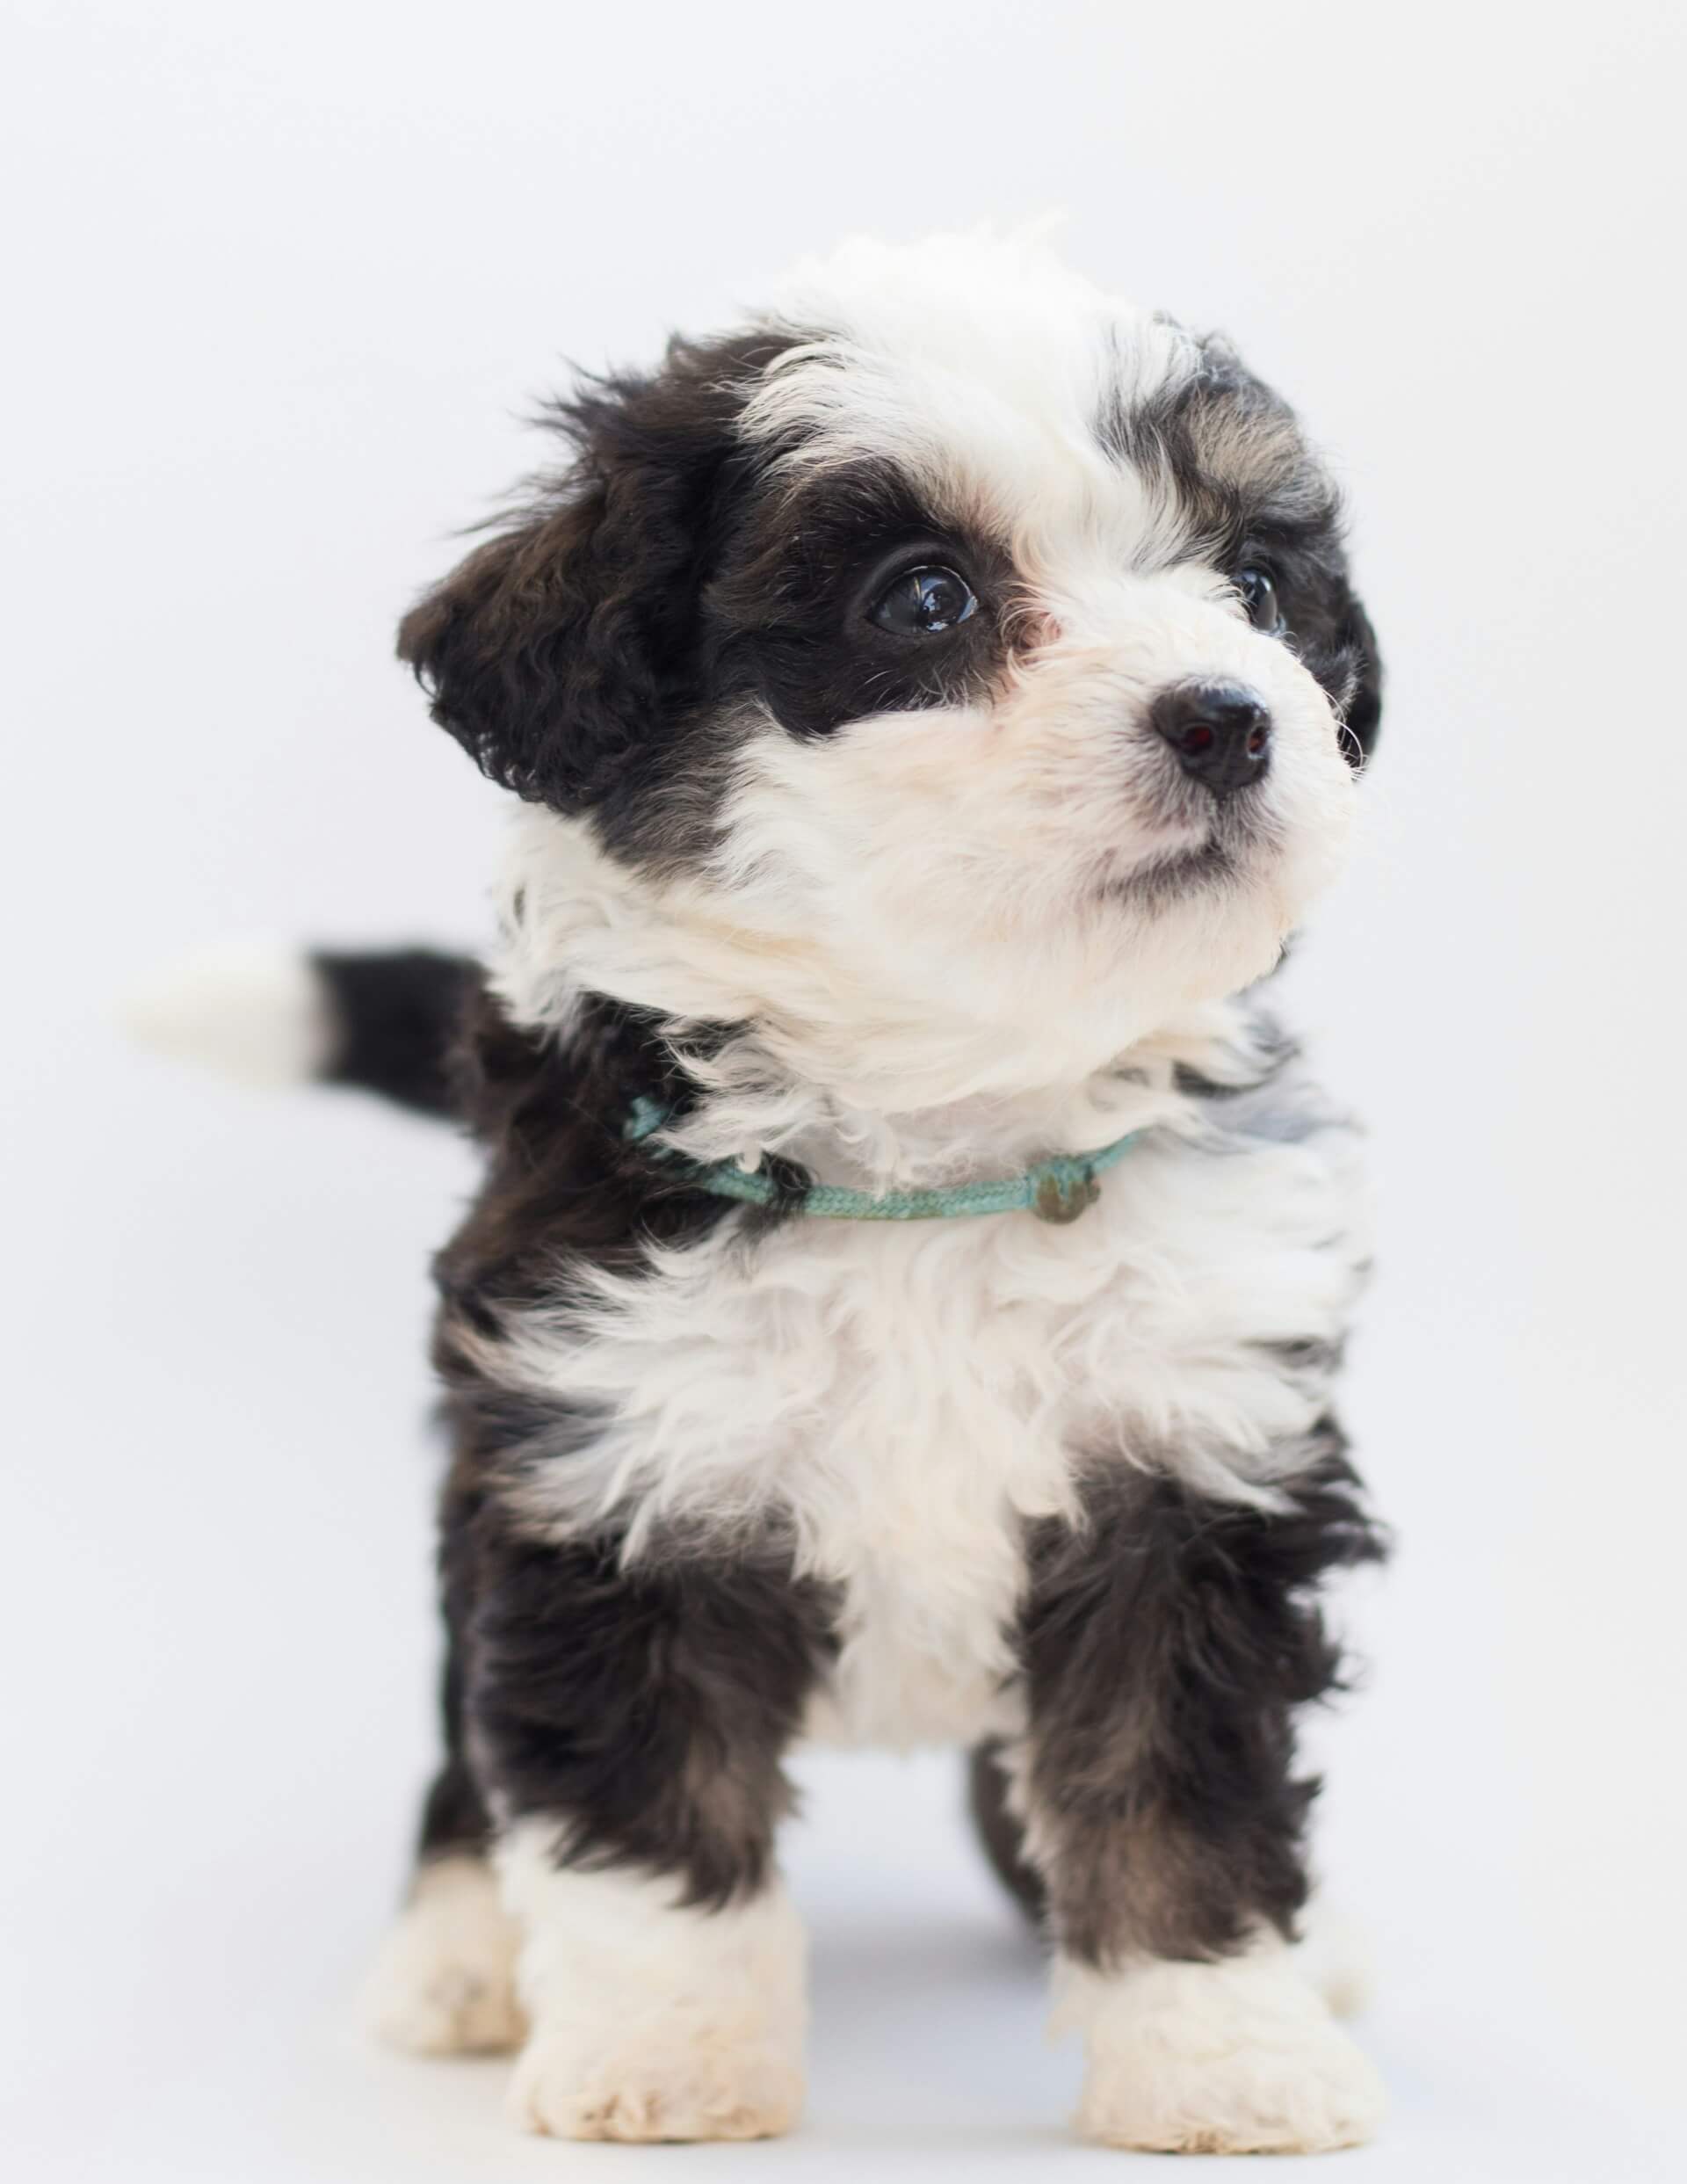 A small black and white puppy standing up